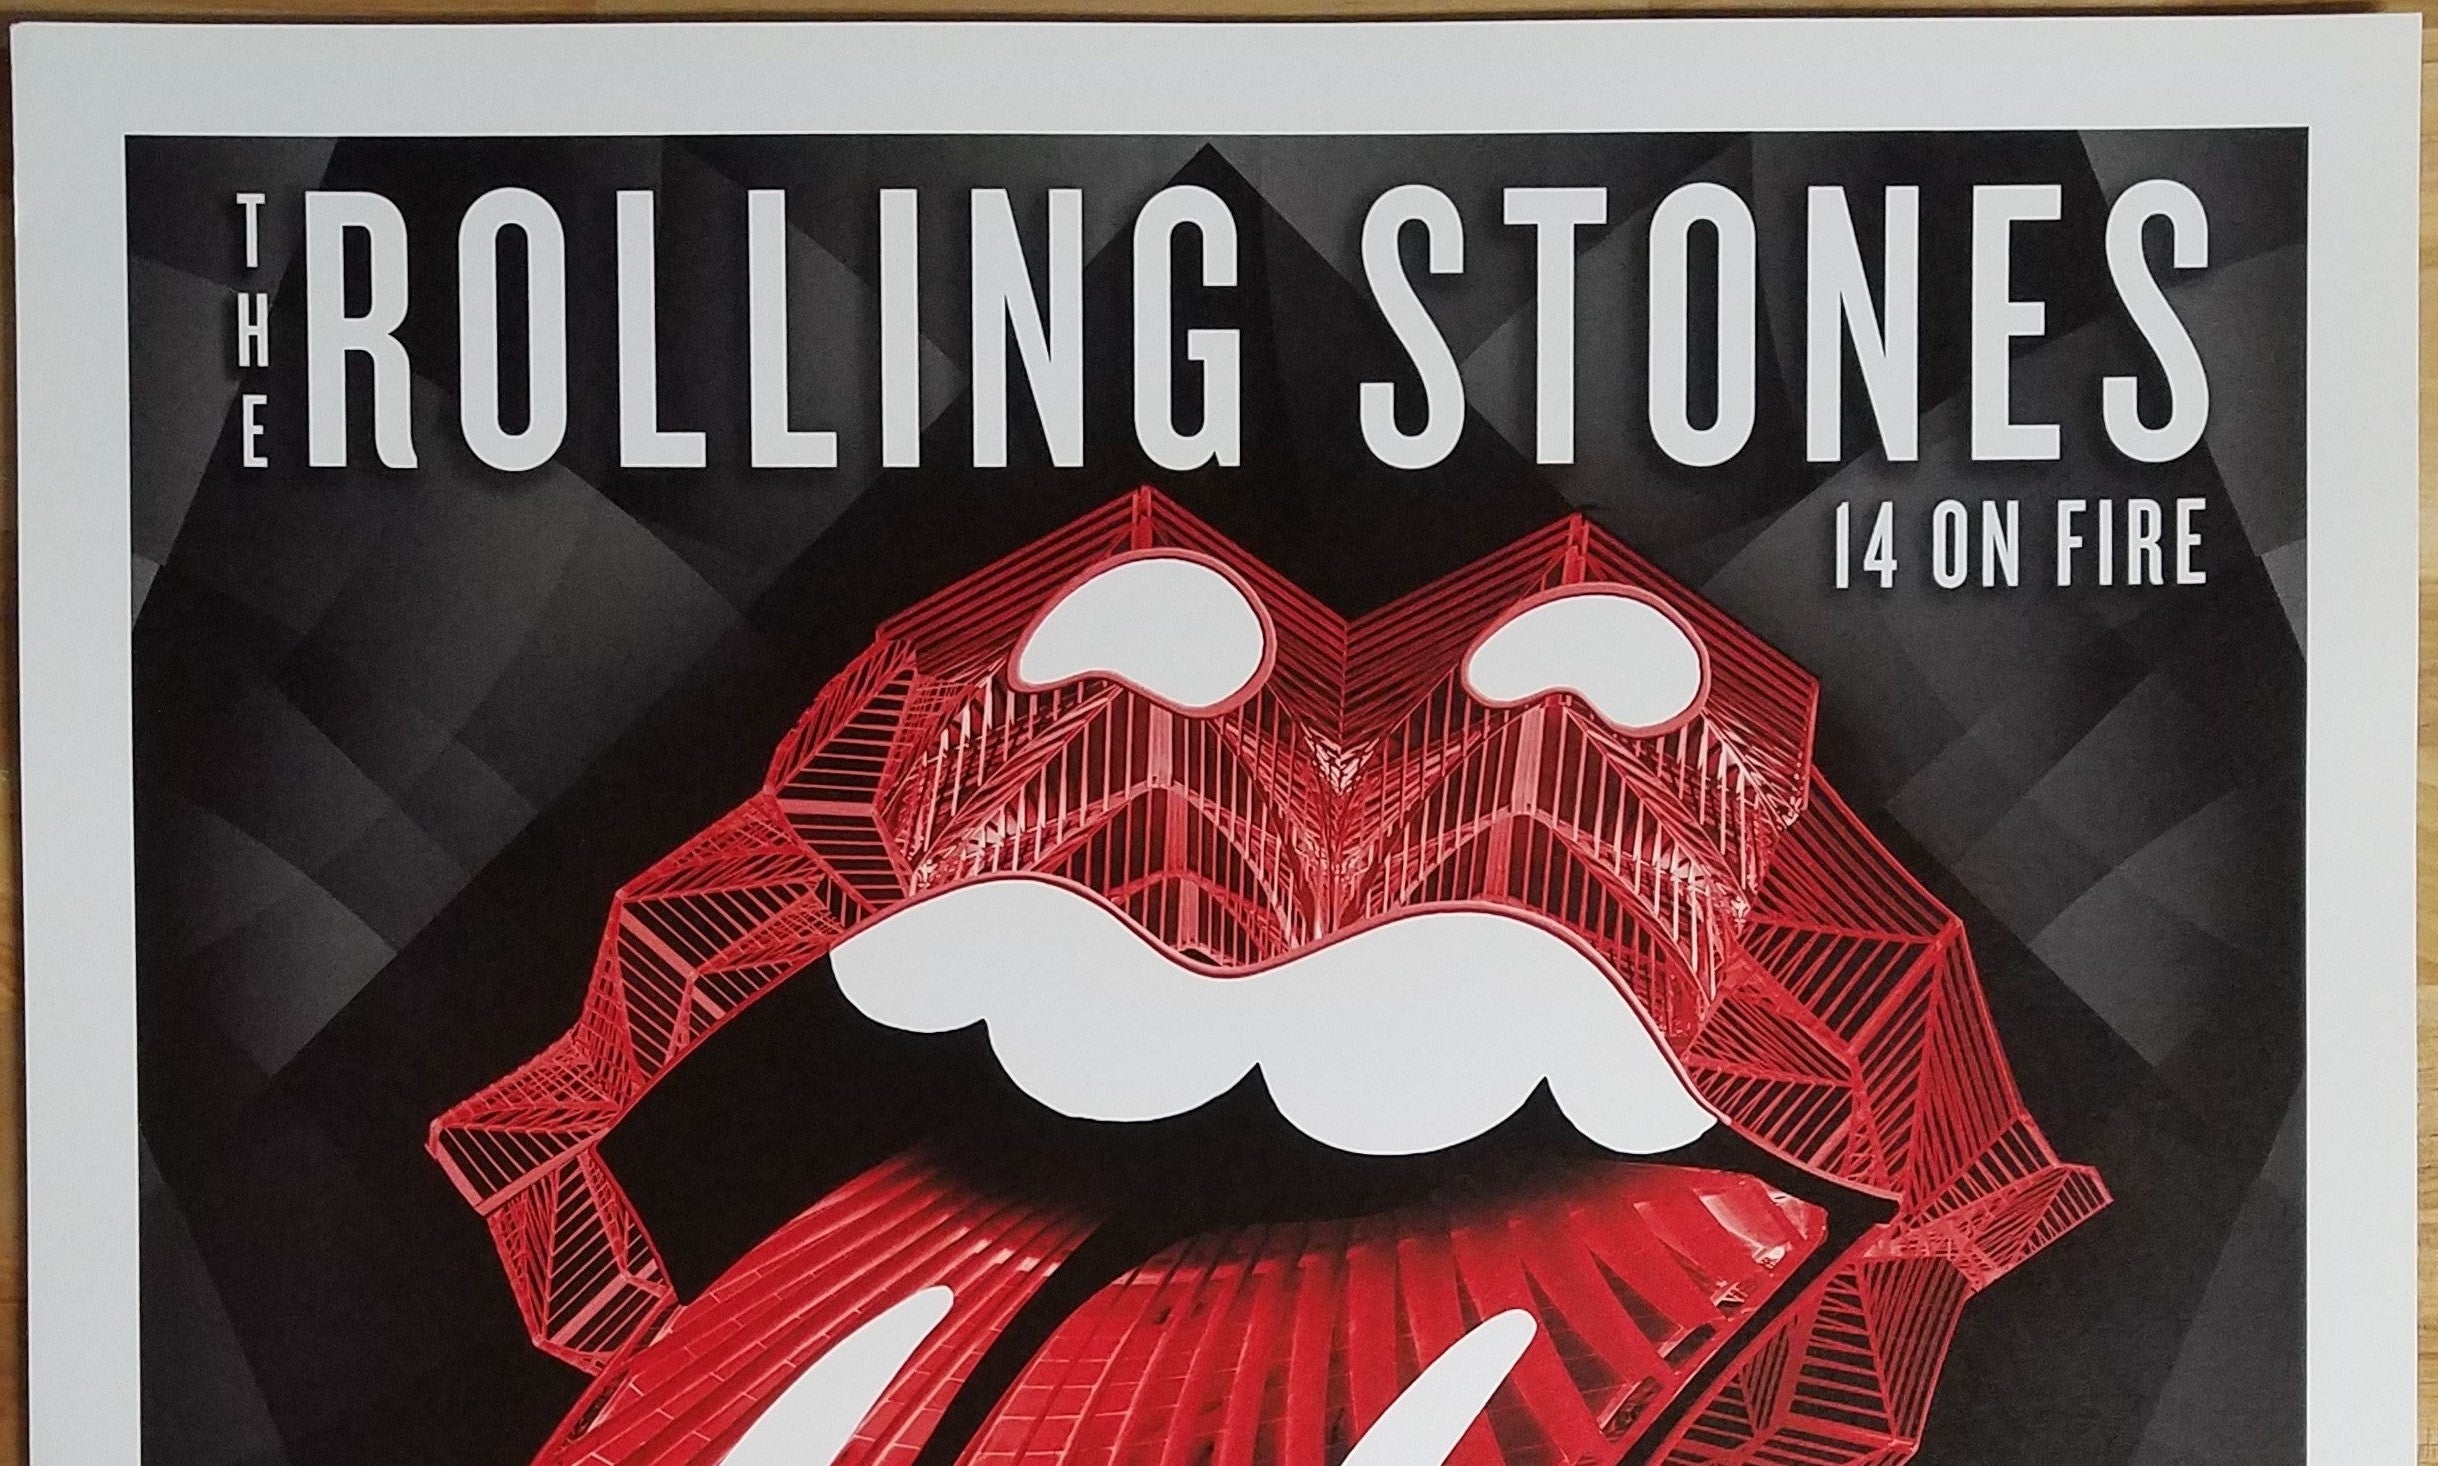 Title: Rolling Stones  - 2014 OFFICIAL POSTER LISBON #2 ROCK IN RIO  Poster artist:   Edition:  xx/500  Type: Limited edition lithograph   Size: 17" x 23"  Location: Lisbon, Portugal   Venue:  Rock in Rio Festival   Notes:  1st edition, official poster hand numbered and embossed.  Official poster, Europe 14 On Fire Tour original from the show!